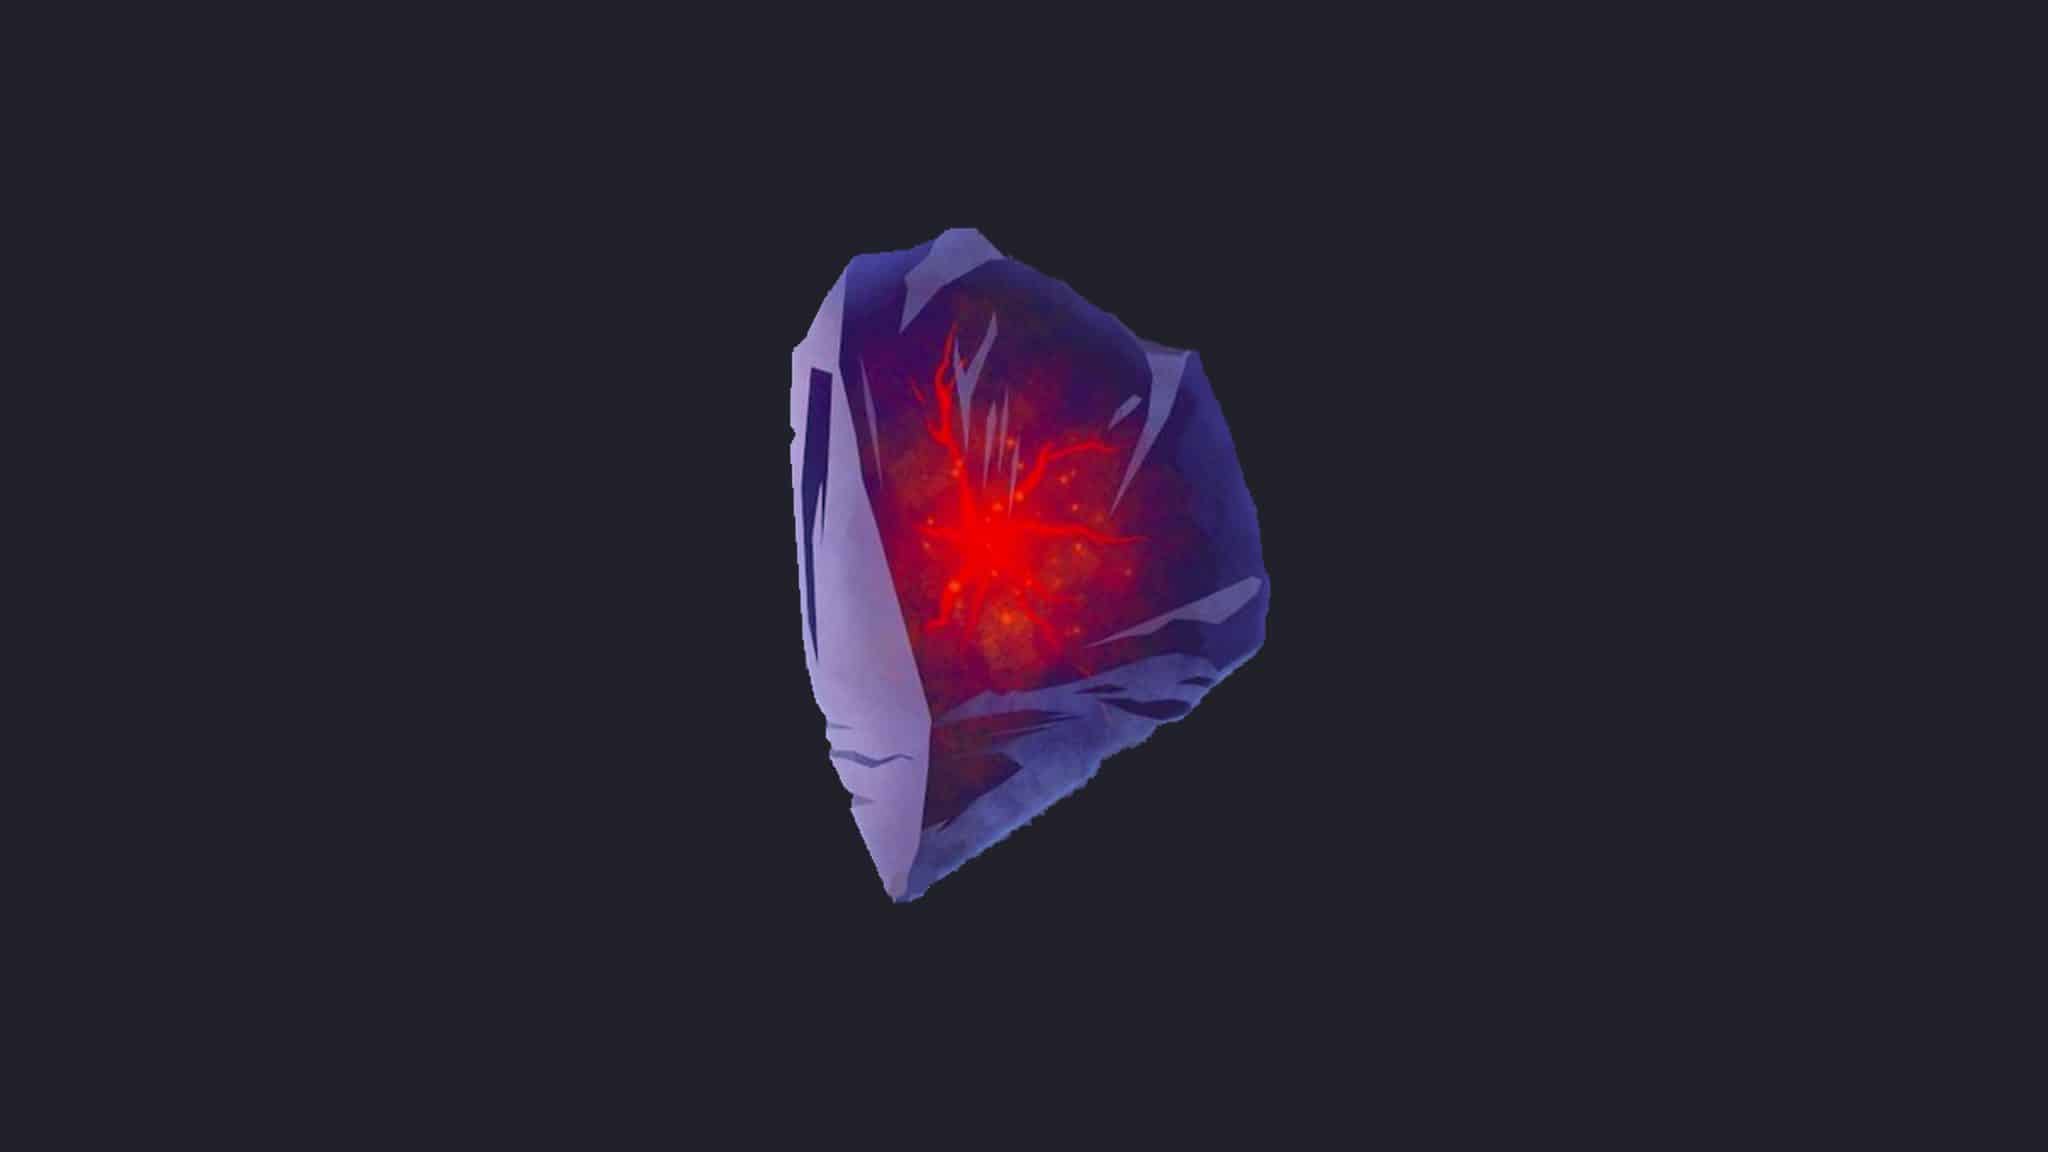 An image of the Iridescent Shard in Dead by Daylight